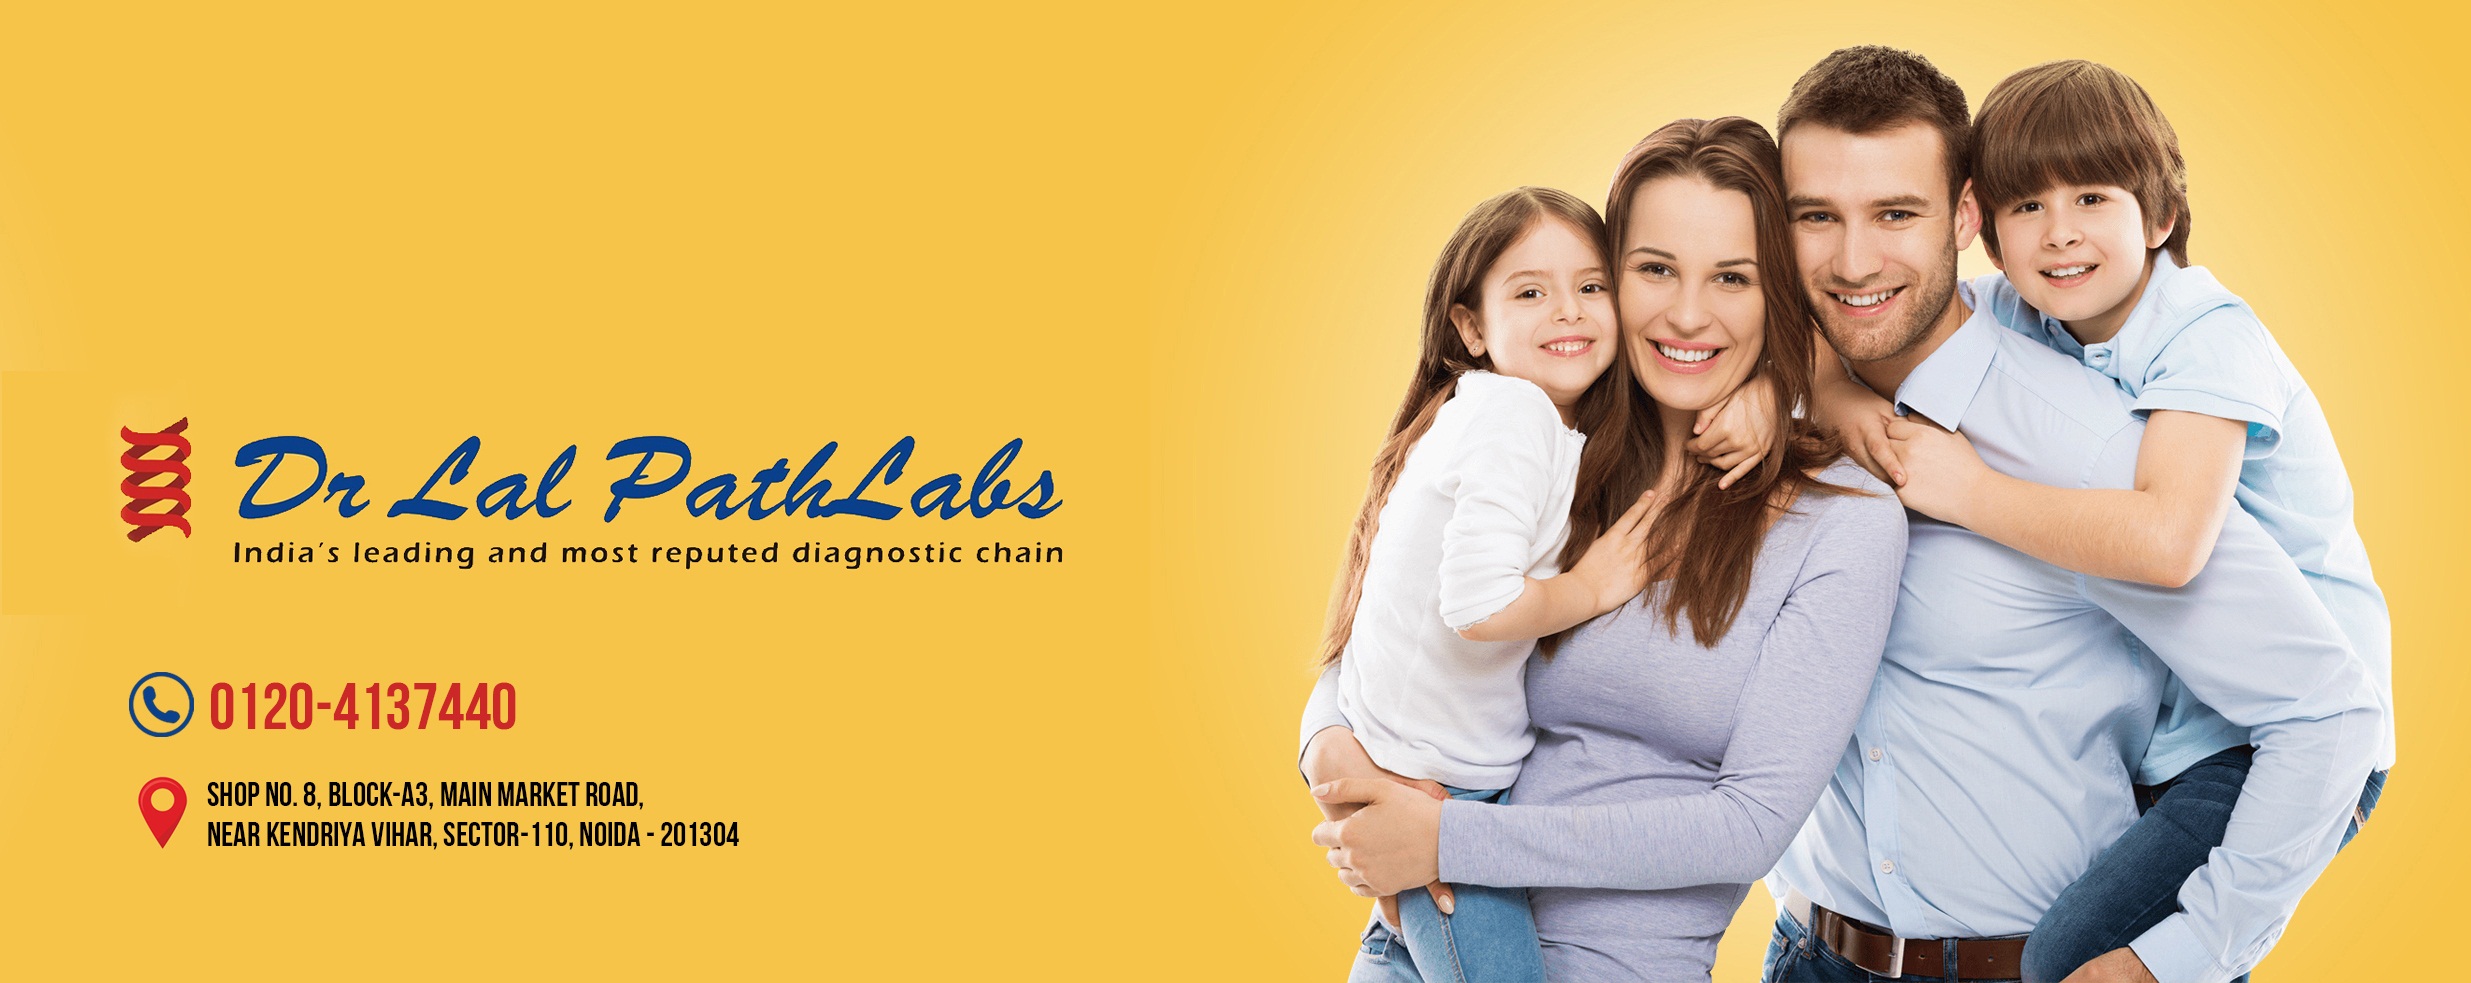 Dr. Lal Path Labs in Punawale,Pune - Best Diagnostic Centres in Pune -  Justdial